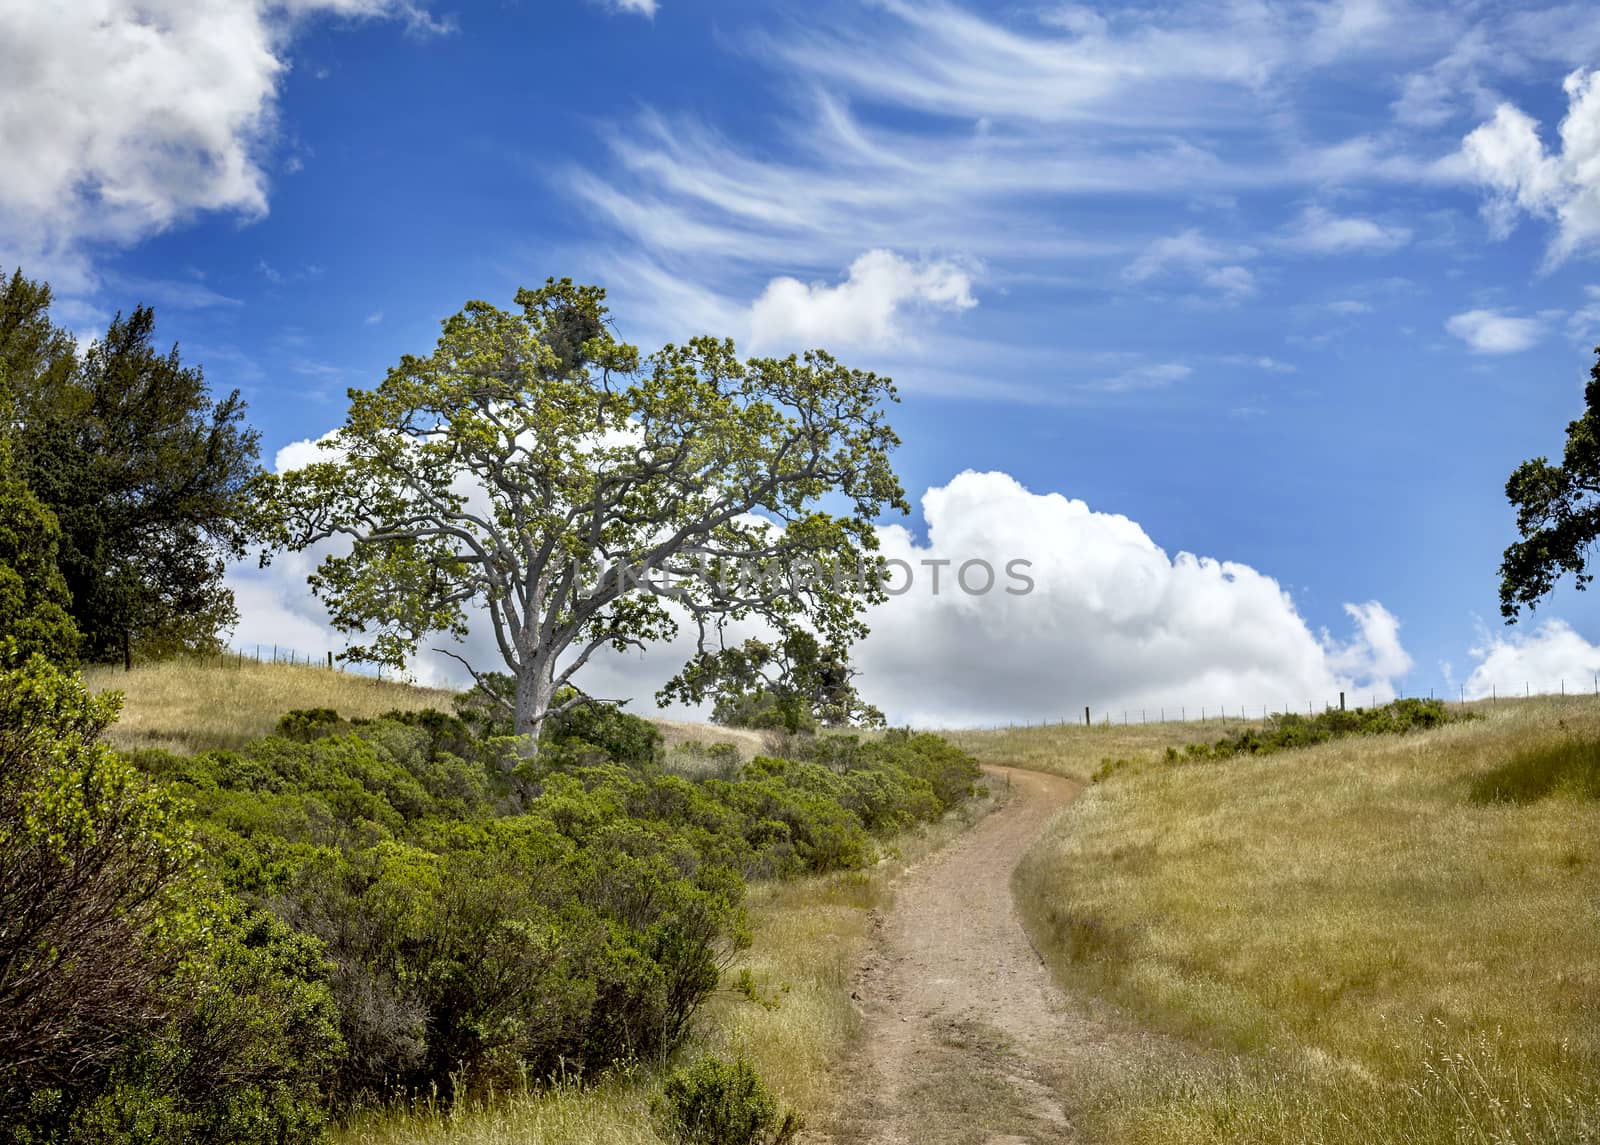 A road leading to a ranch surrounded by trees and grass, located in Northern California.